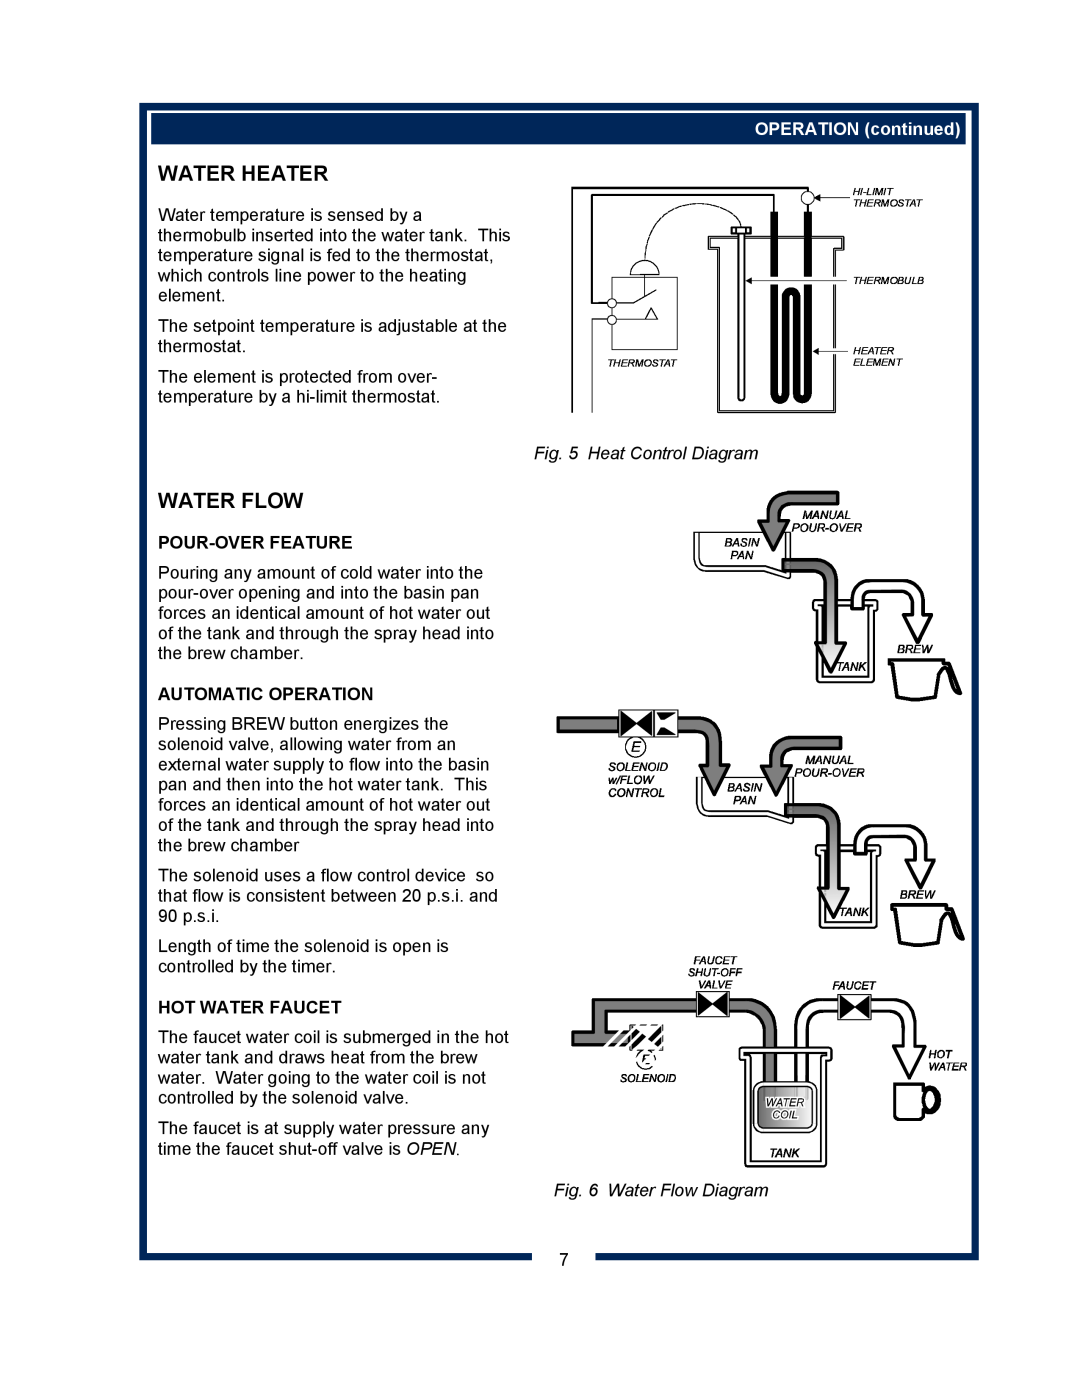 Bloomfield 8541 Water Heater, Water Flow, OPERATION continued, Heat Control Diagram, Pour-Over Feature, Hot Water Faucet 